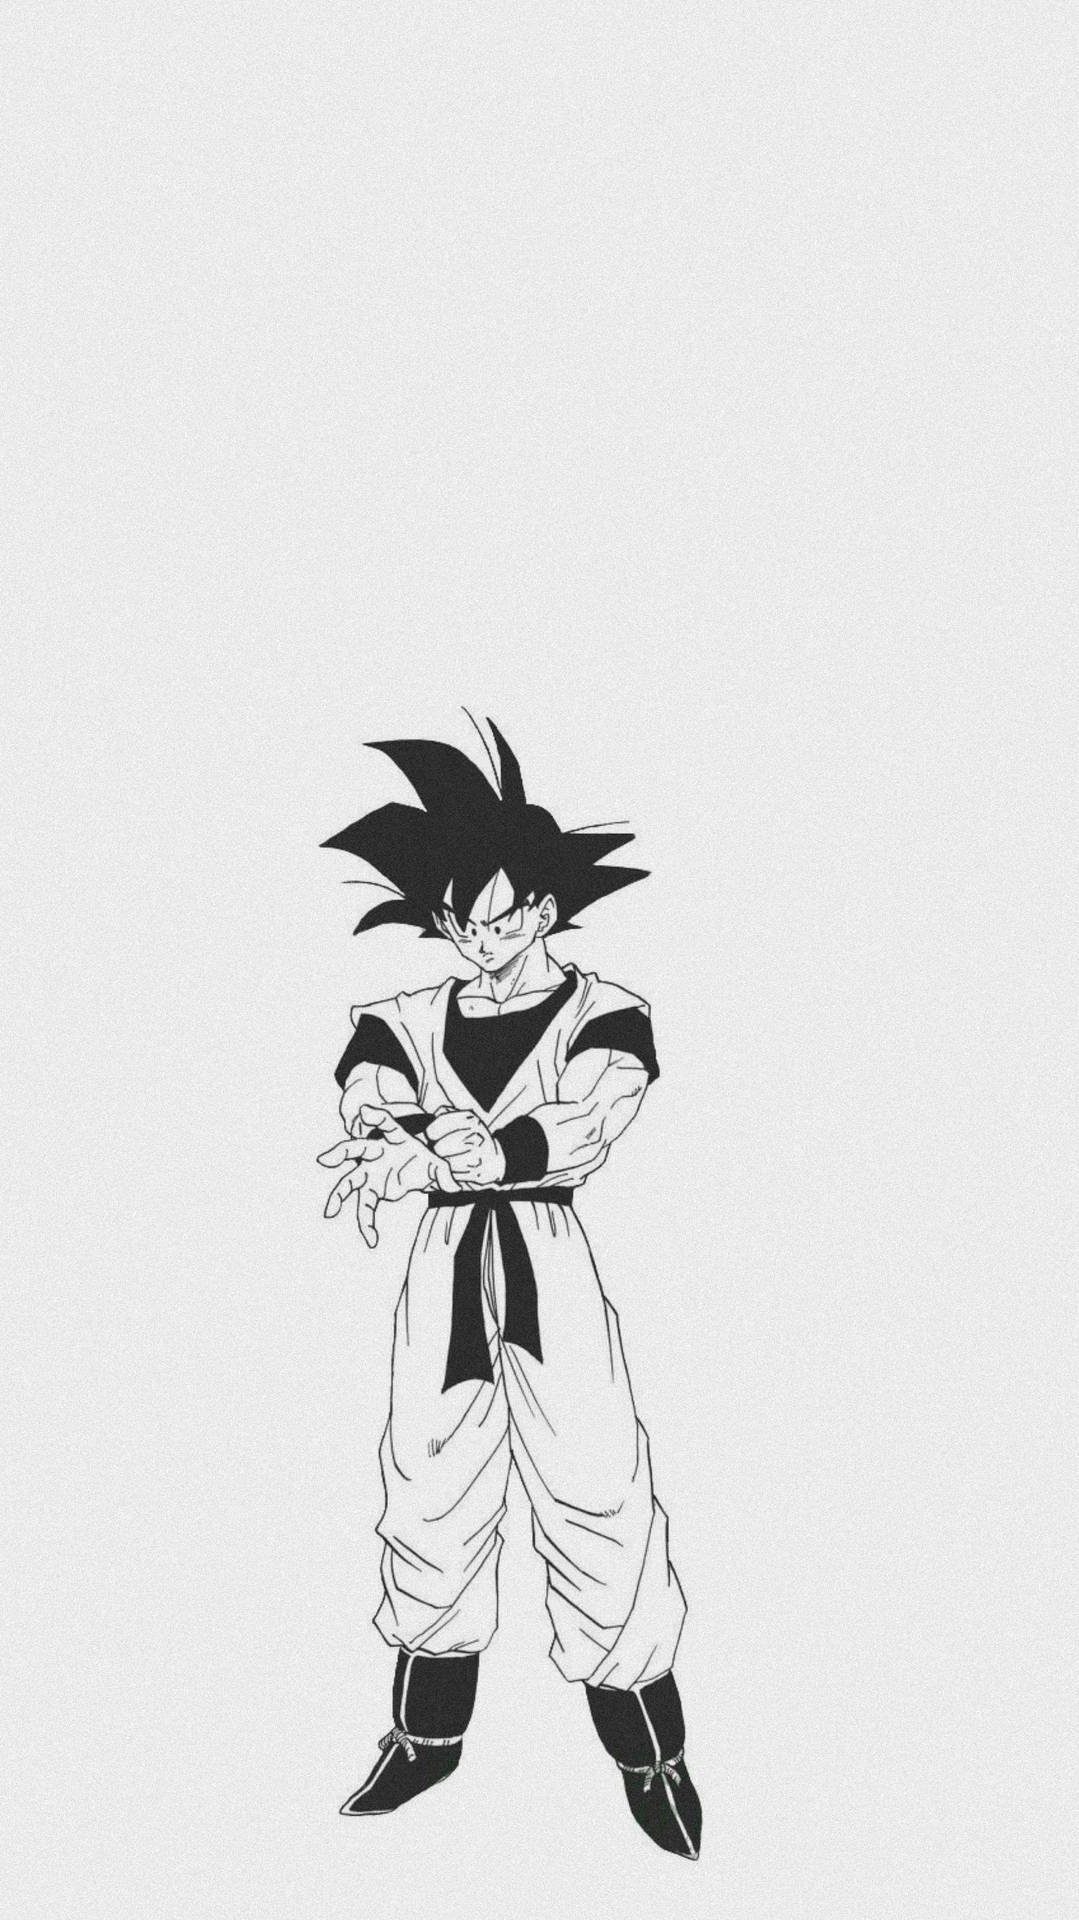 "Go Beyond The Ordinary With Goku Black and White" Wallpaper